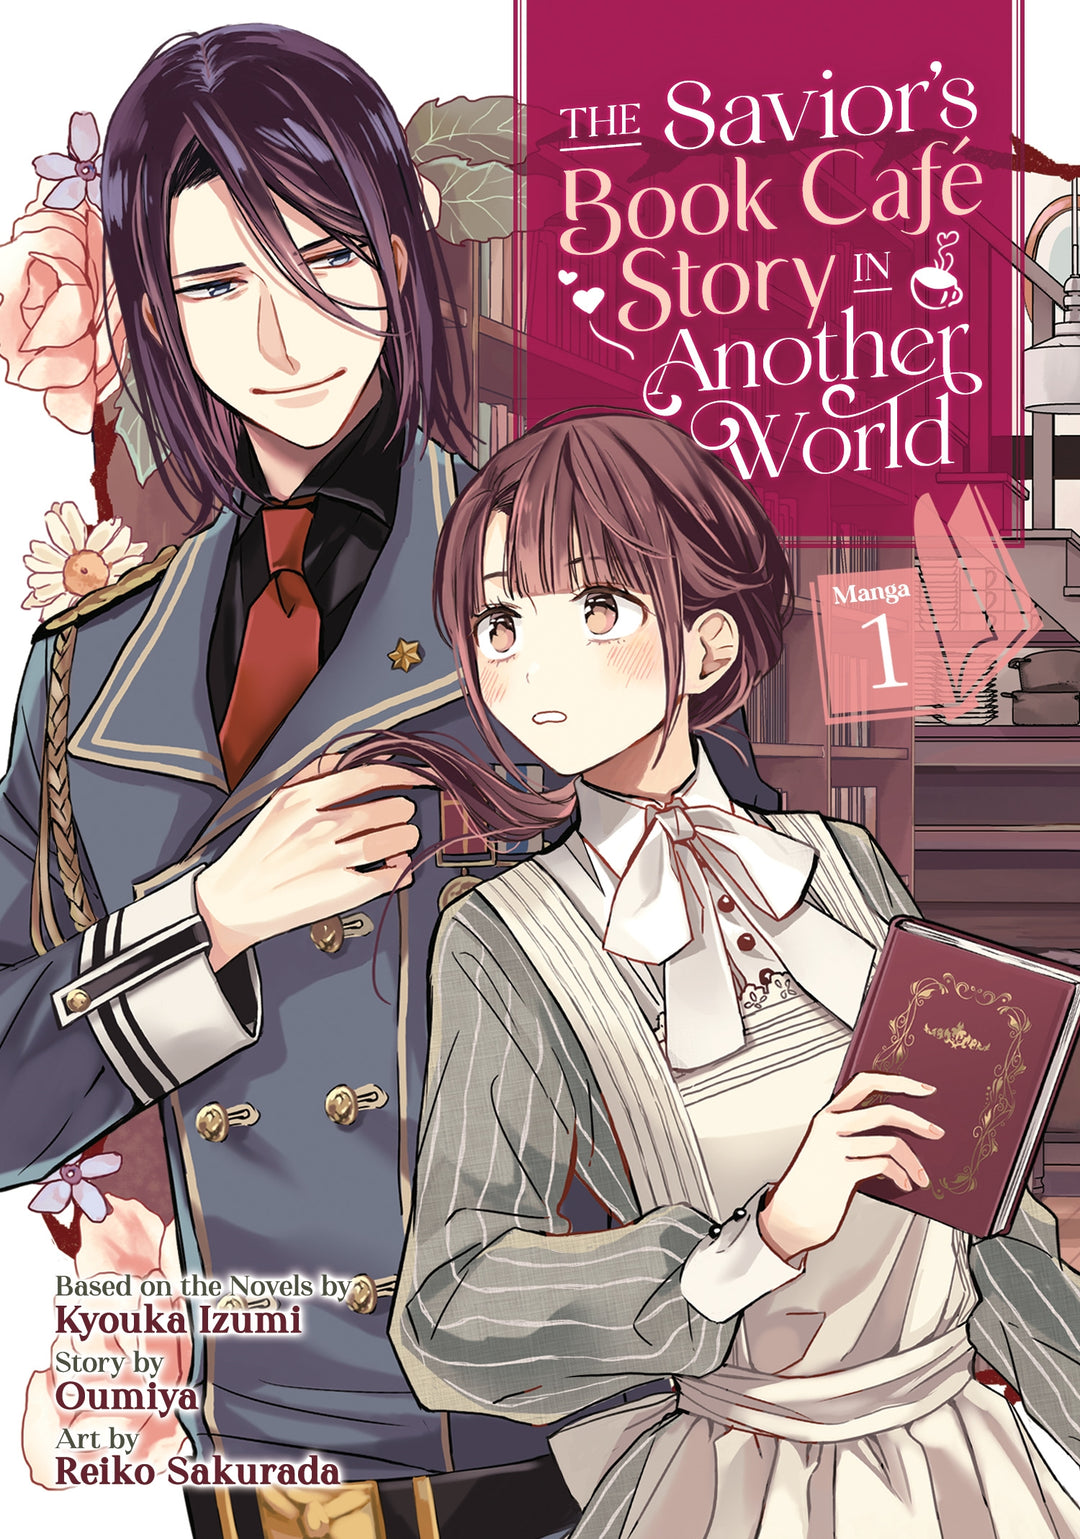 The Savior's Book Cafe Story in Another World (Manga), Vol. 01